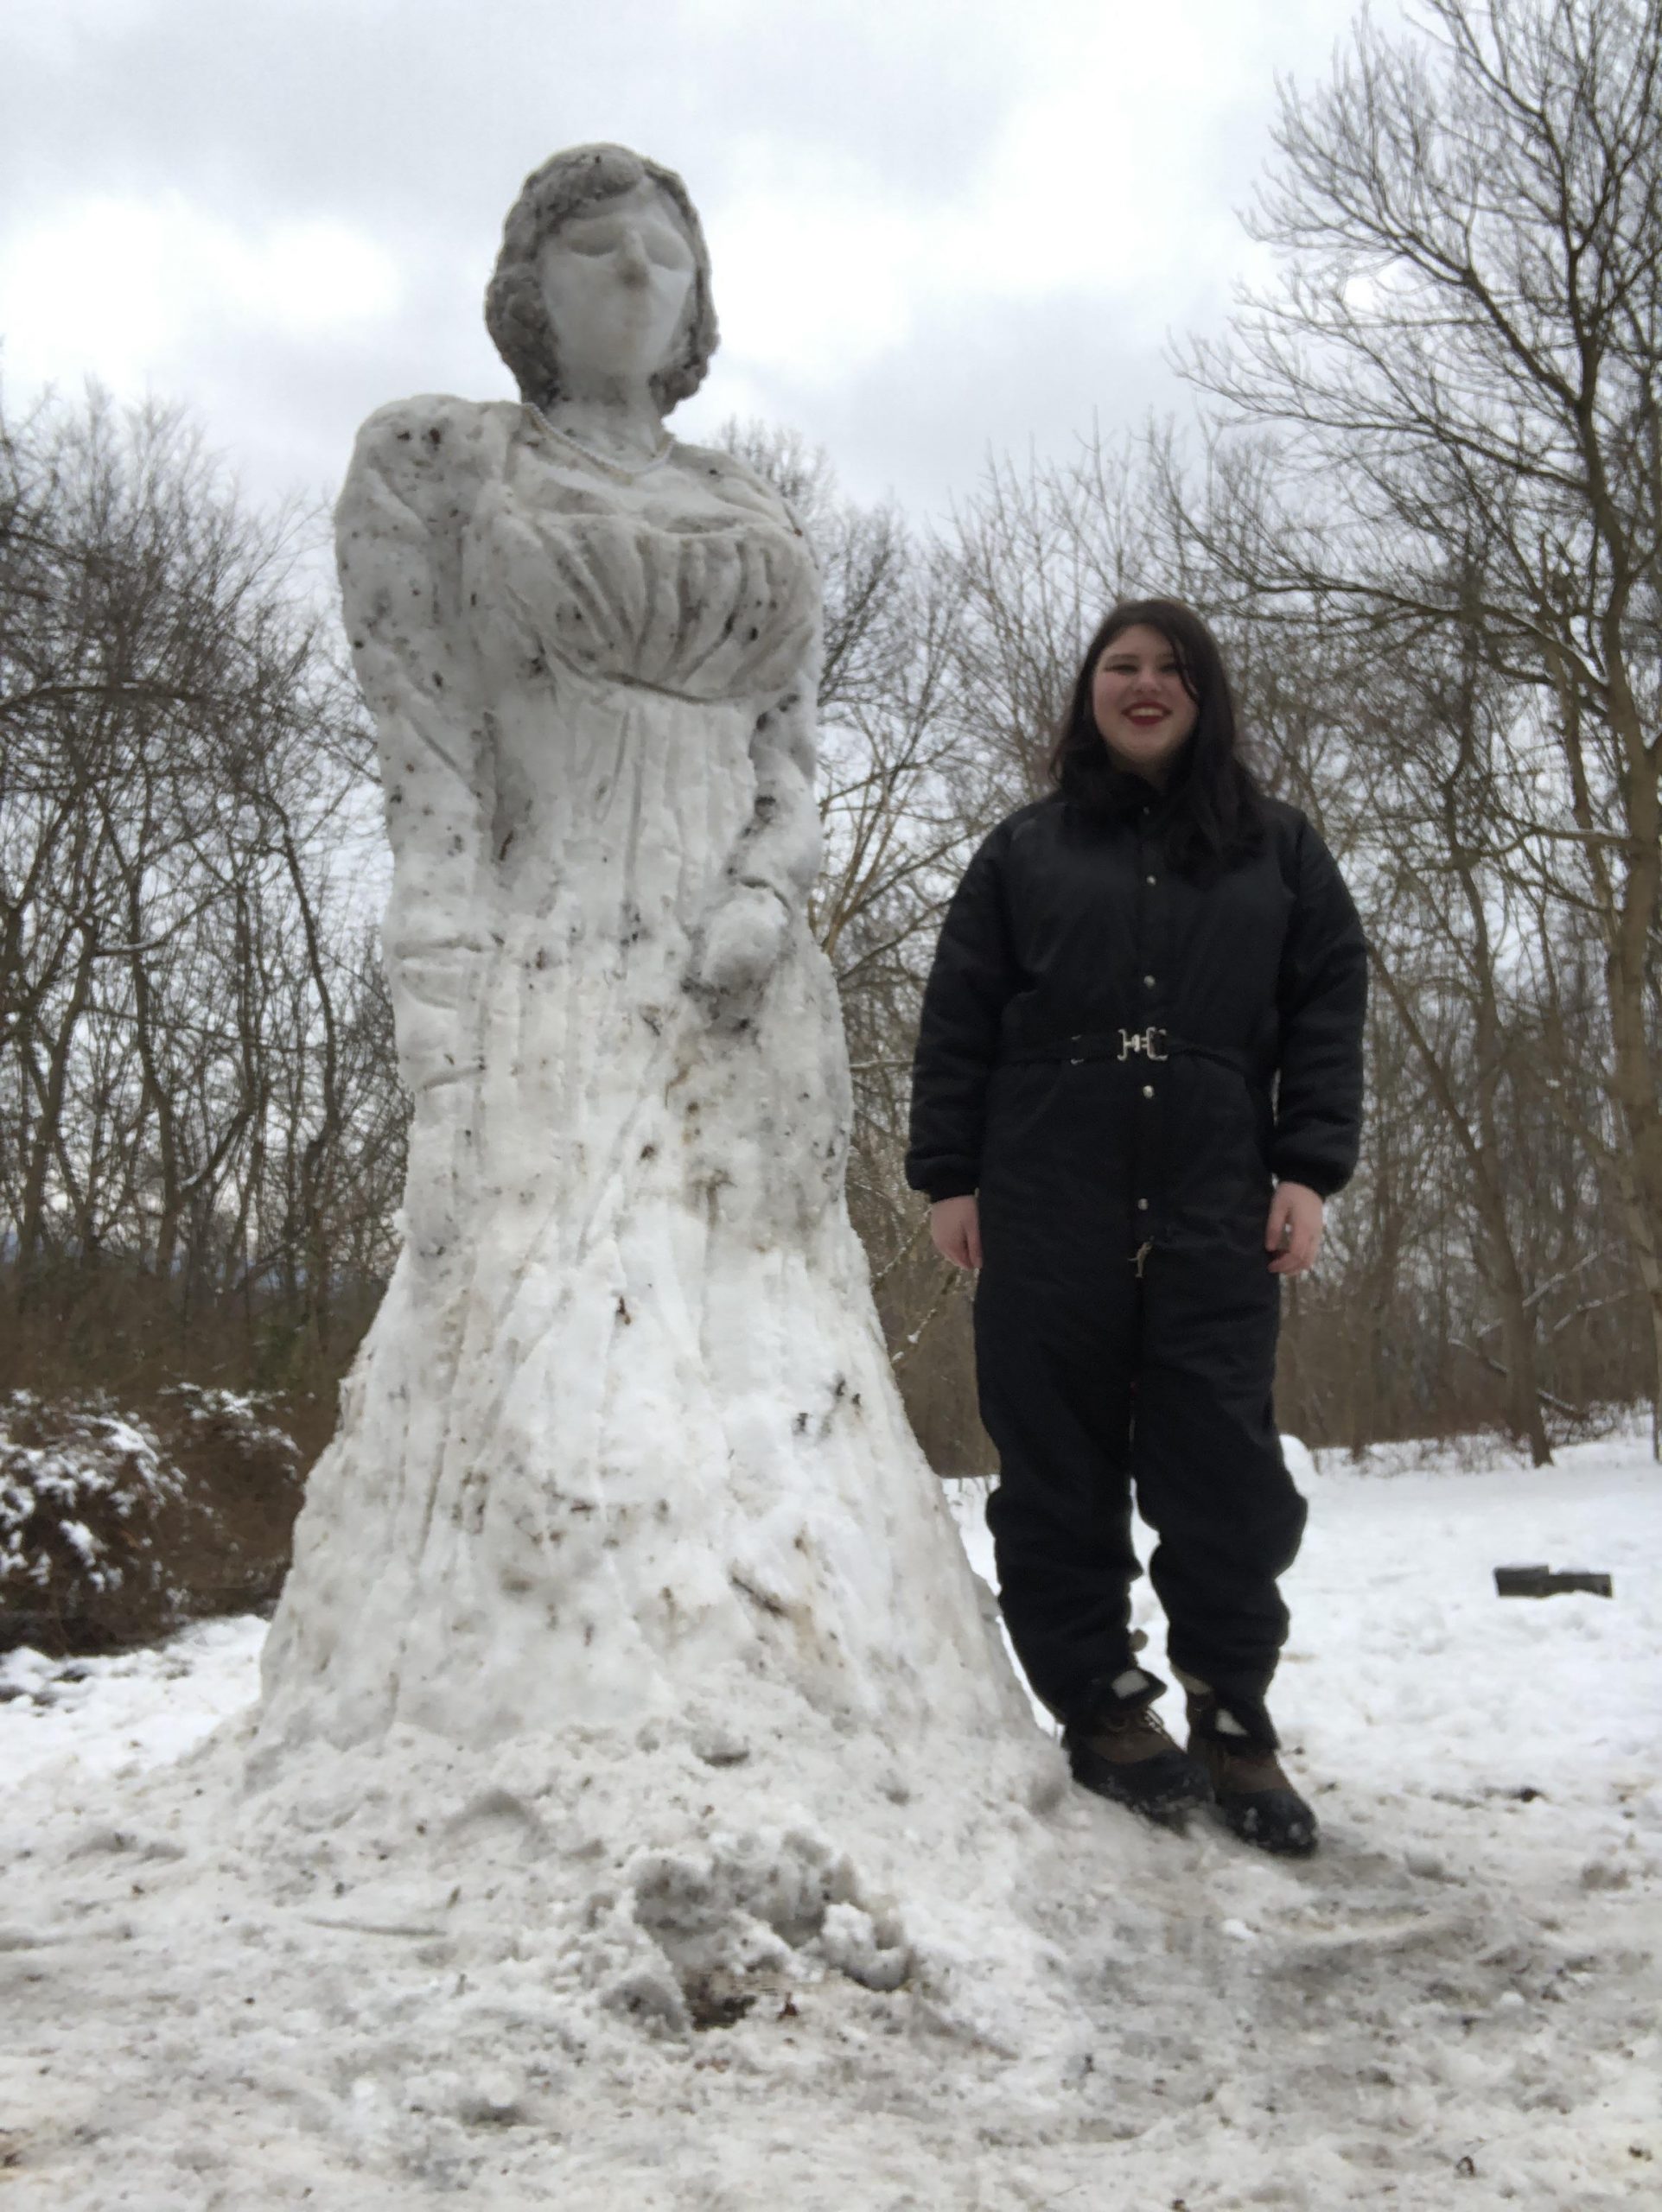 3 meter scale snow sculpture of the character Lady Dimetriscu from the video game Resident Evil 2021